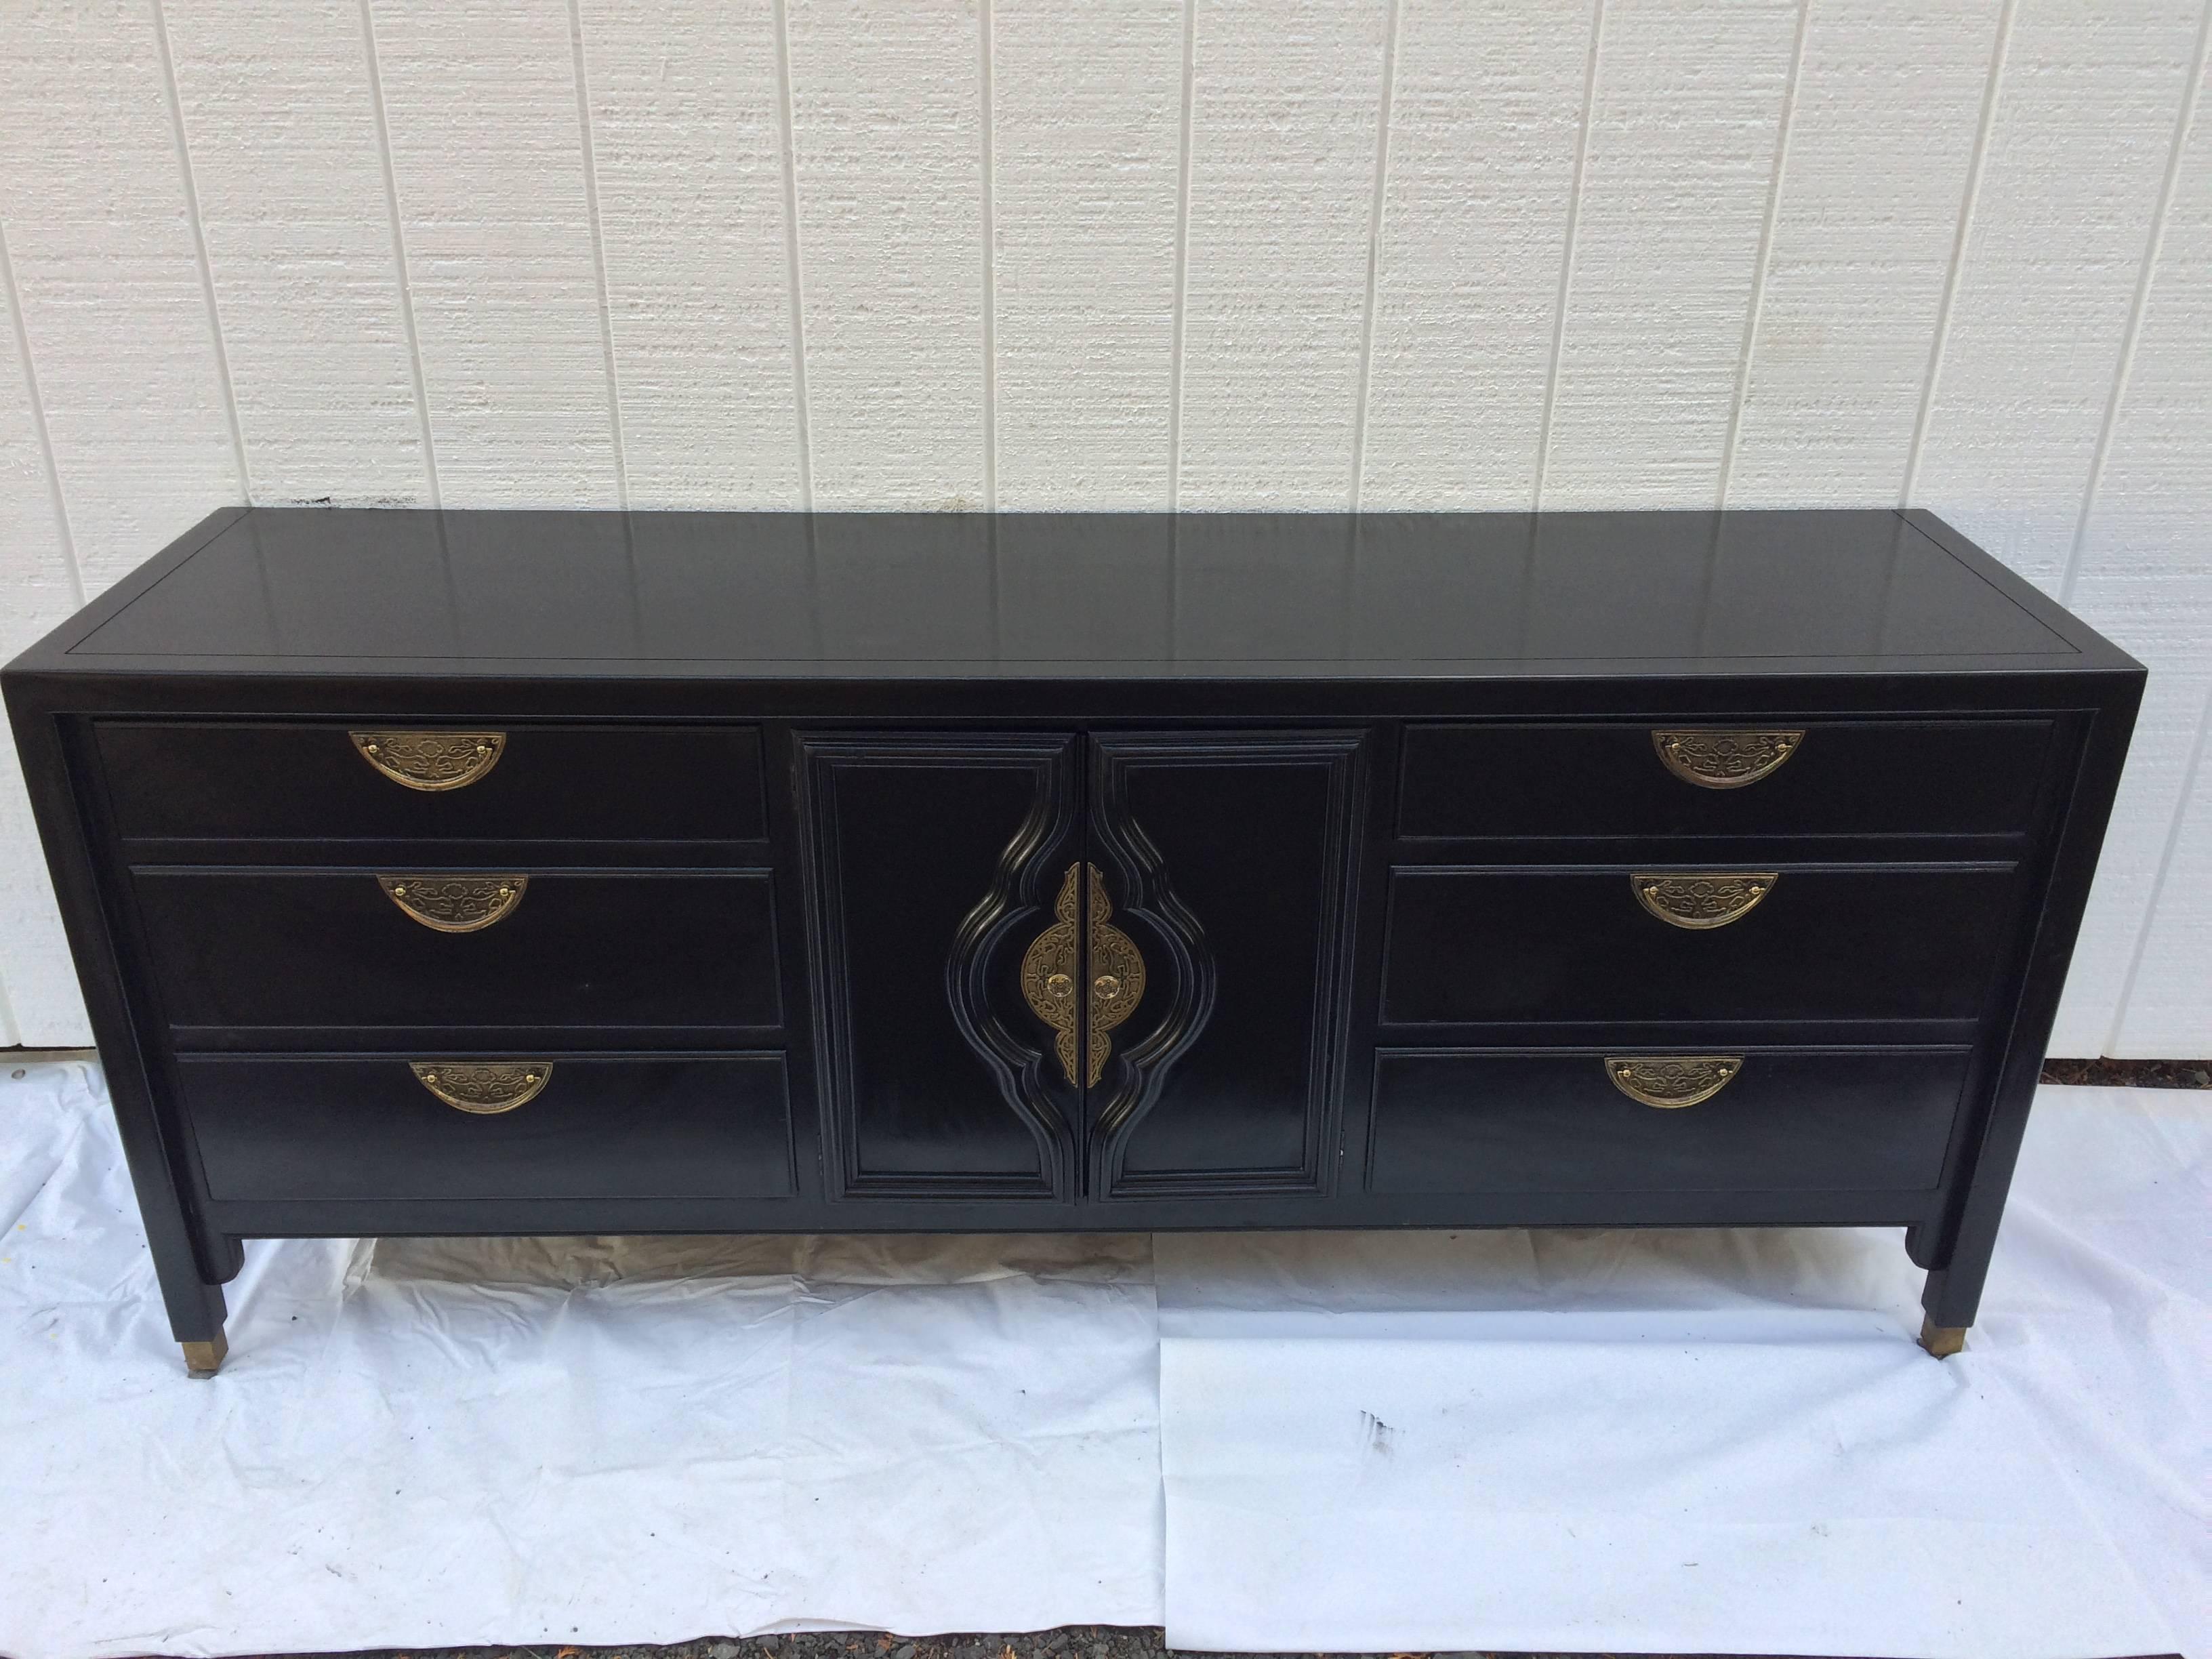 American Hollywood Regency Dresser in the Style of James Mont for Century